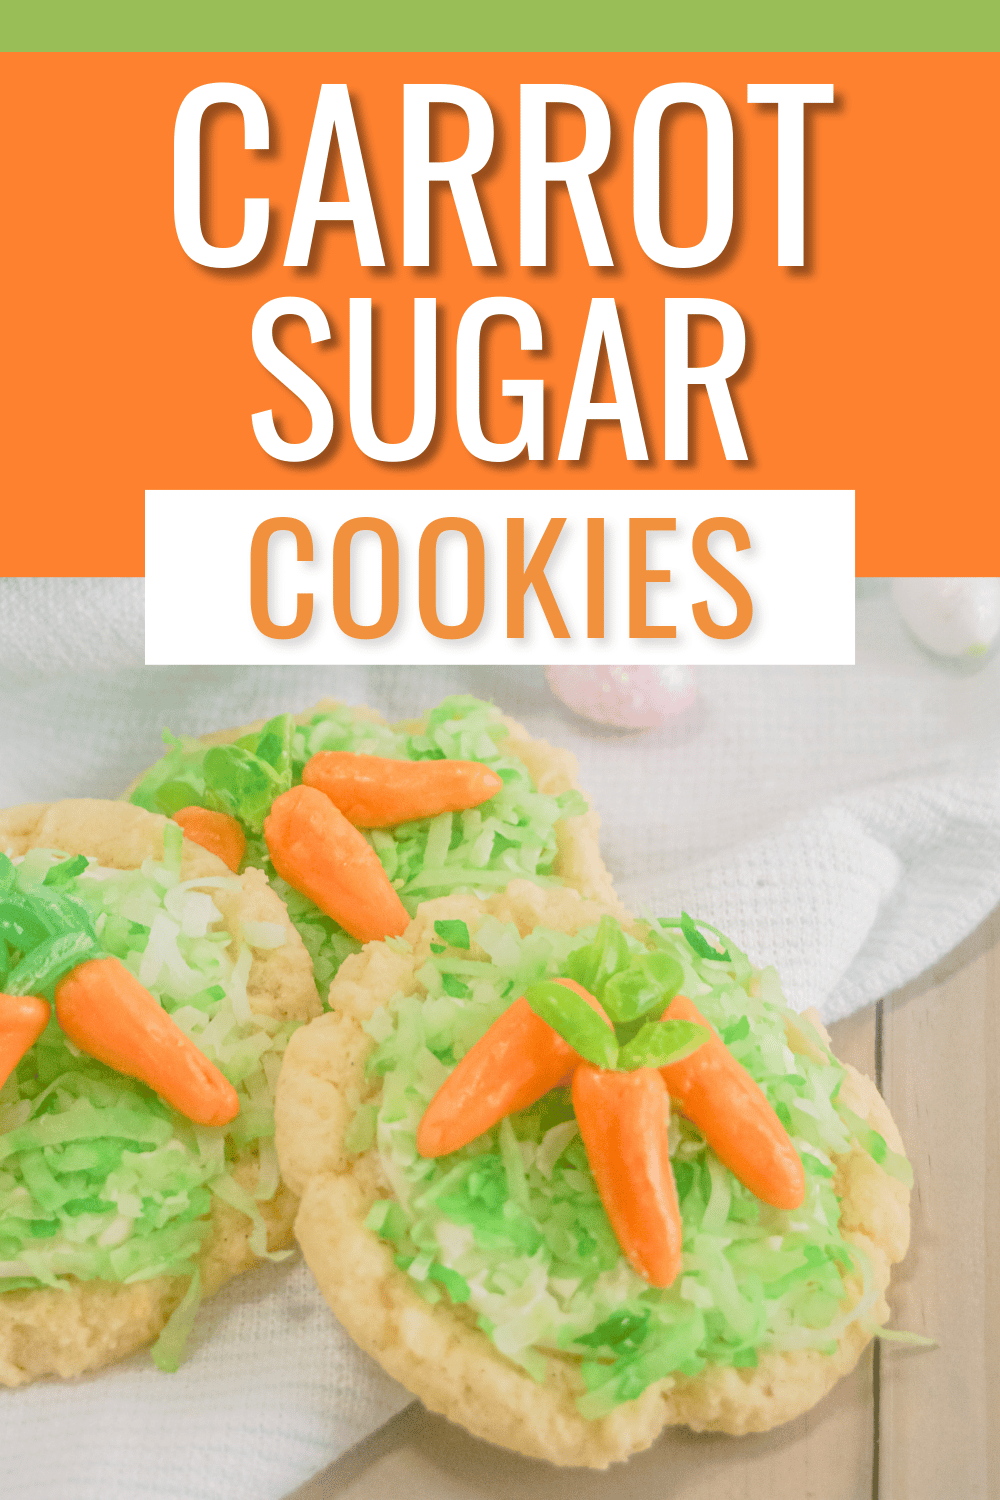 These Carrot Sugar Cookies are soft, chewy, and beautifully decorated. They are a festive, yet easy Easter dessert. #carrotsugarcookies #eastercookies #sugarcookies #easterdessert #cookierecipe via @wondermomwannab